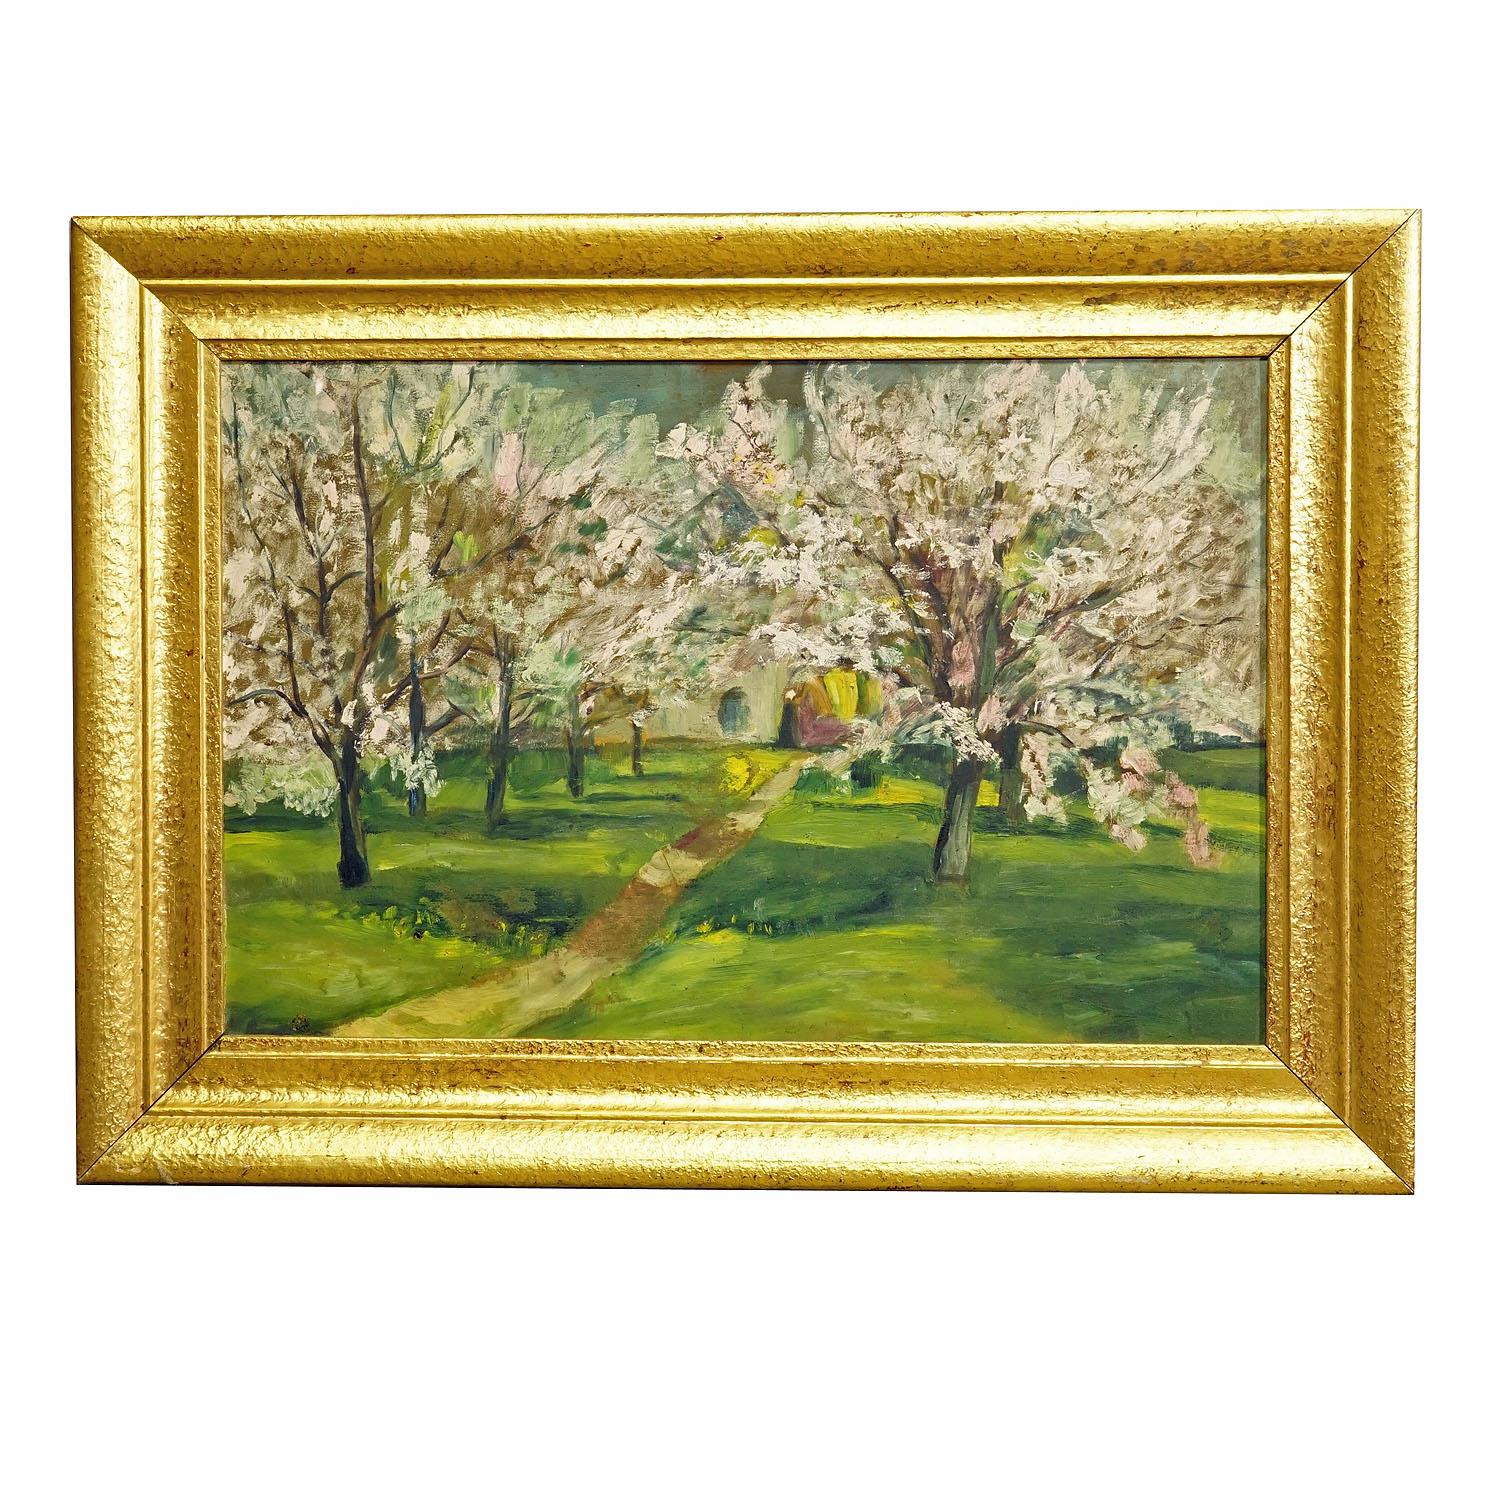 Impressionistic painting of a garden with blossoming apple trees

A colorful impressionistic oil painting depicting a garden with blossoming apple trees. Oil painting on board with vigorous pastell colors. Framed with antique decorative gilded